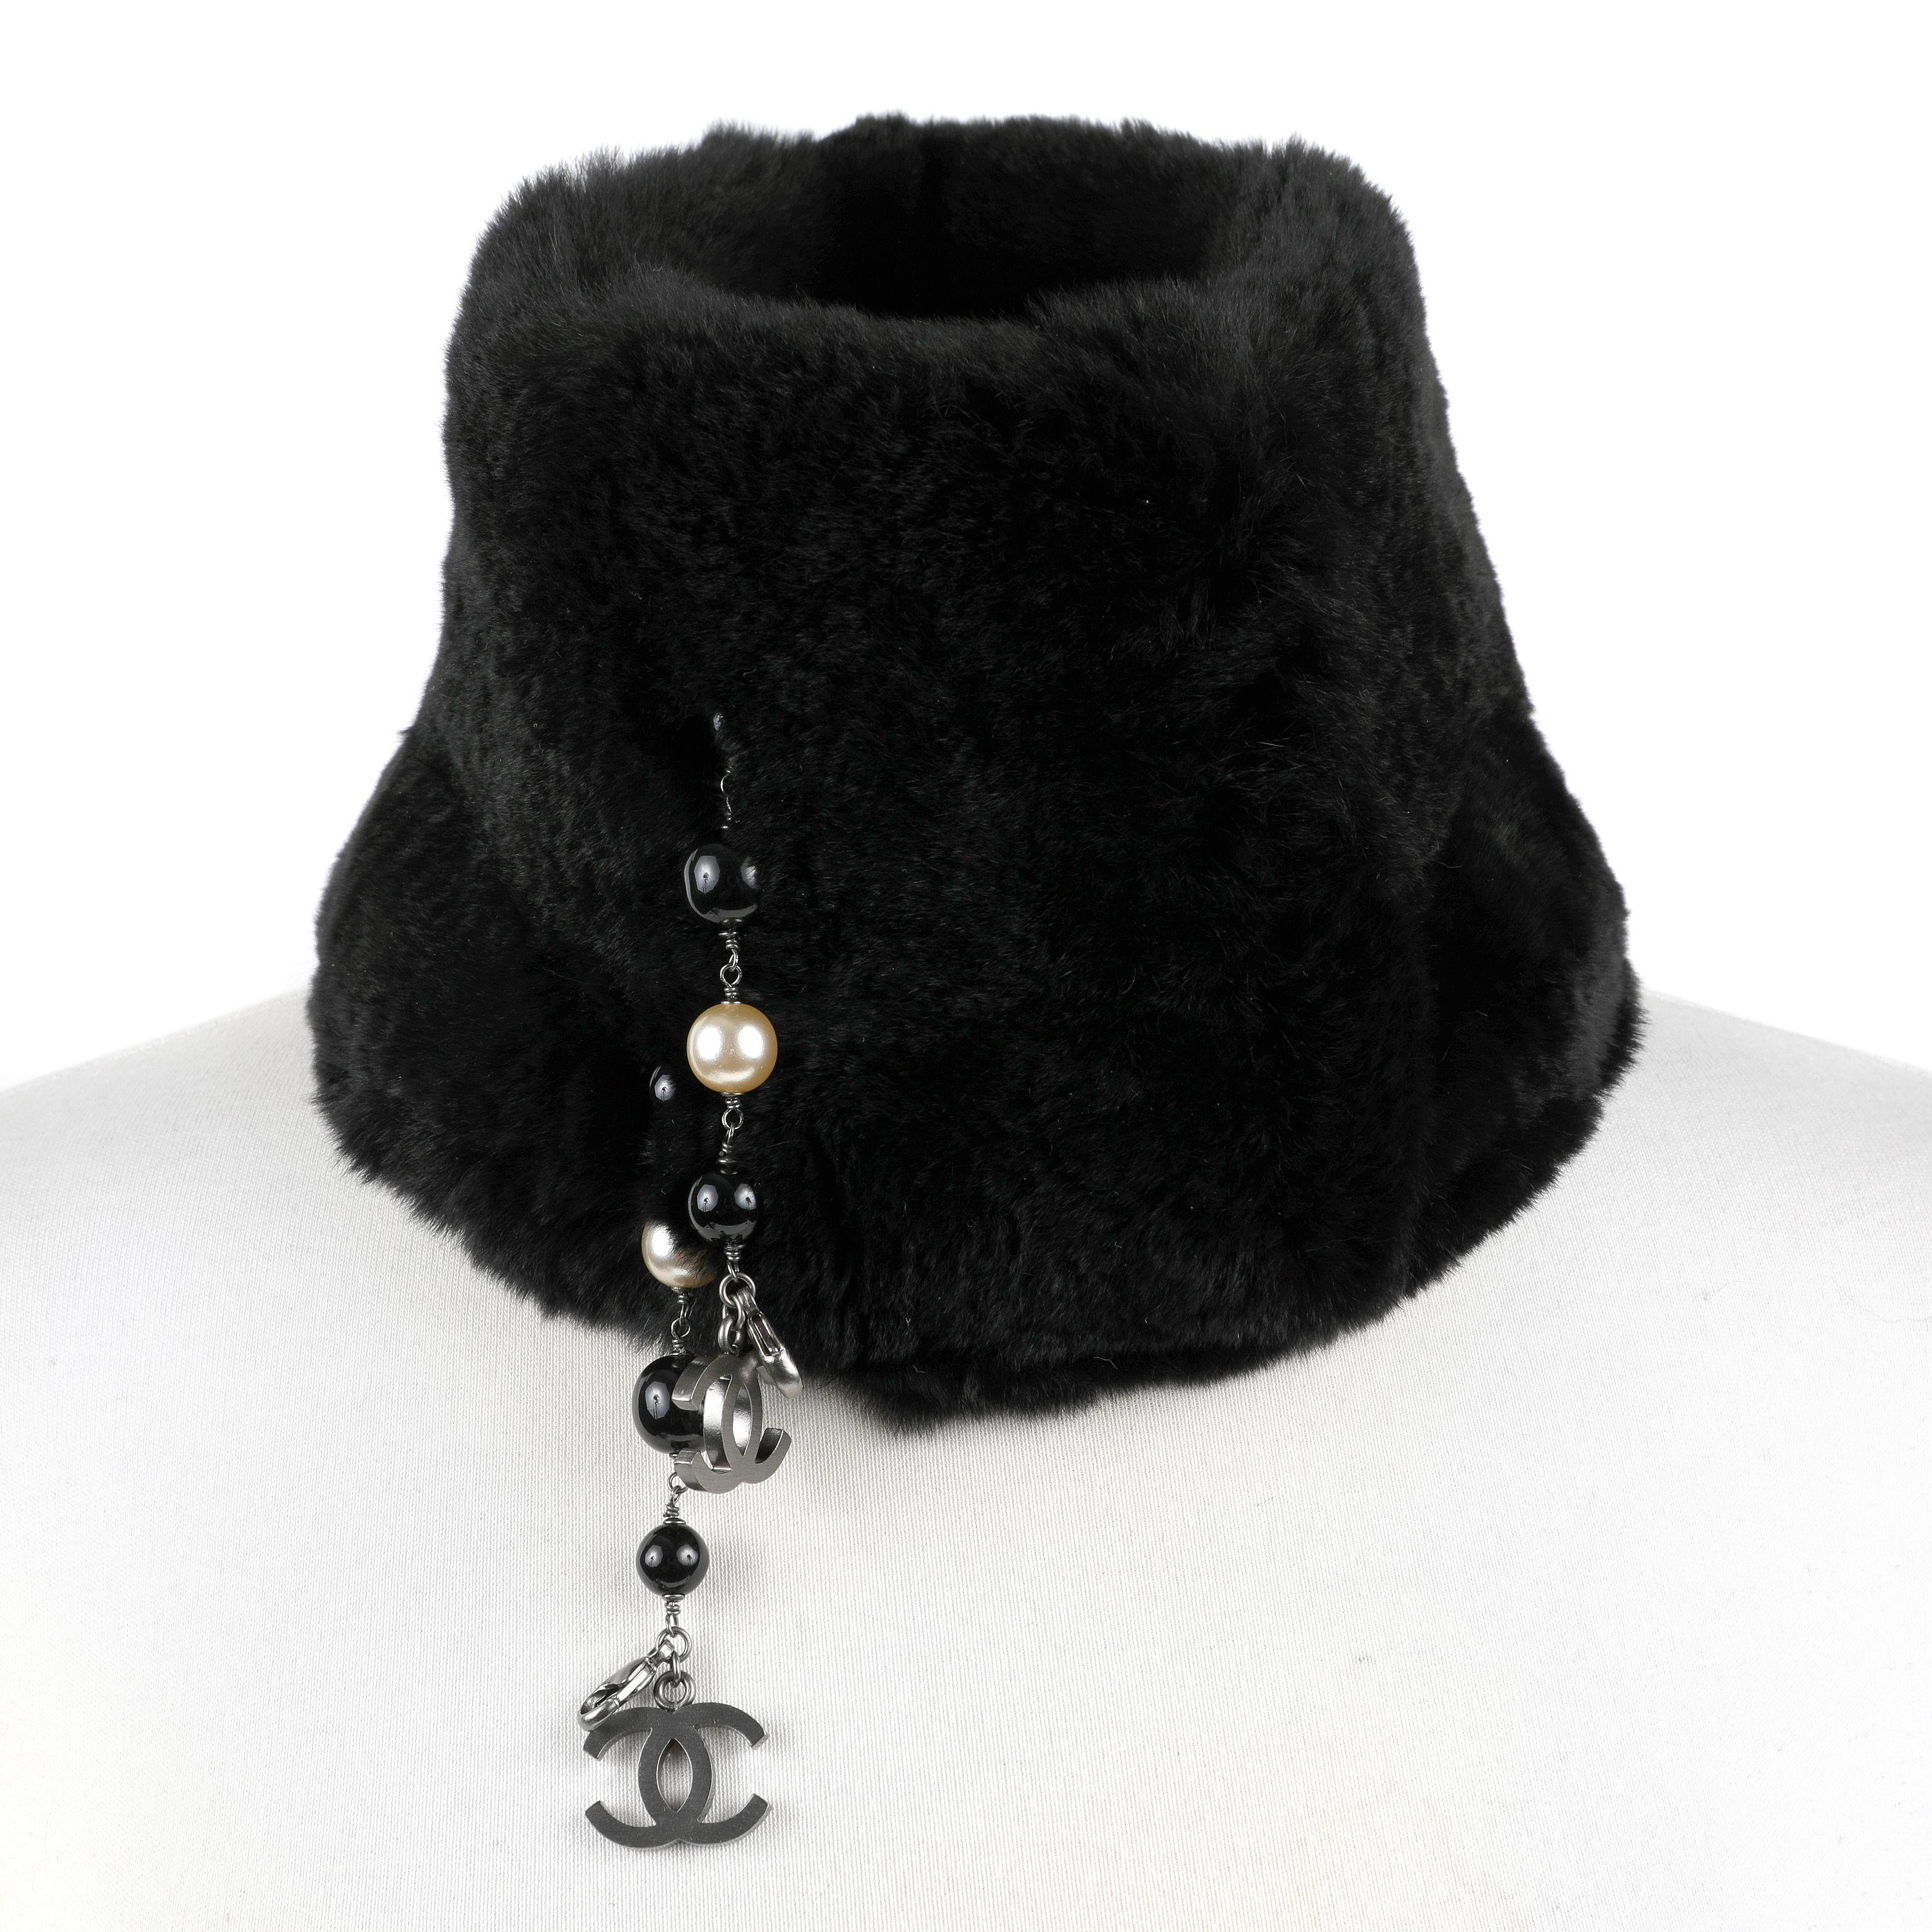 Chanel Black Rabbit Fur Collar with Pearls In Excellent Condition For Sale In Palm Beach, FL